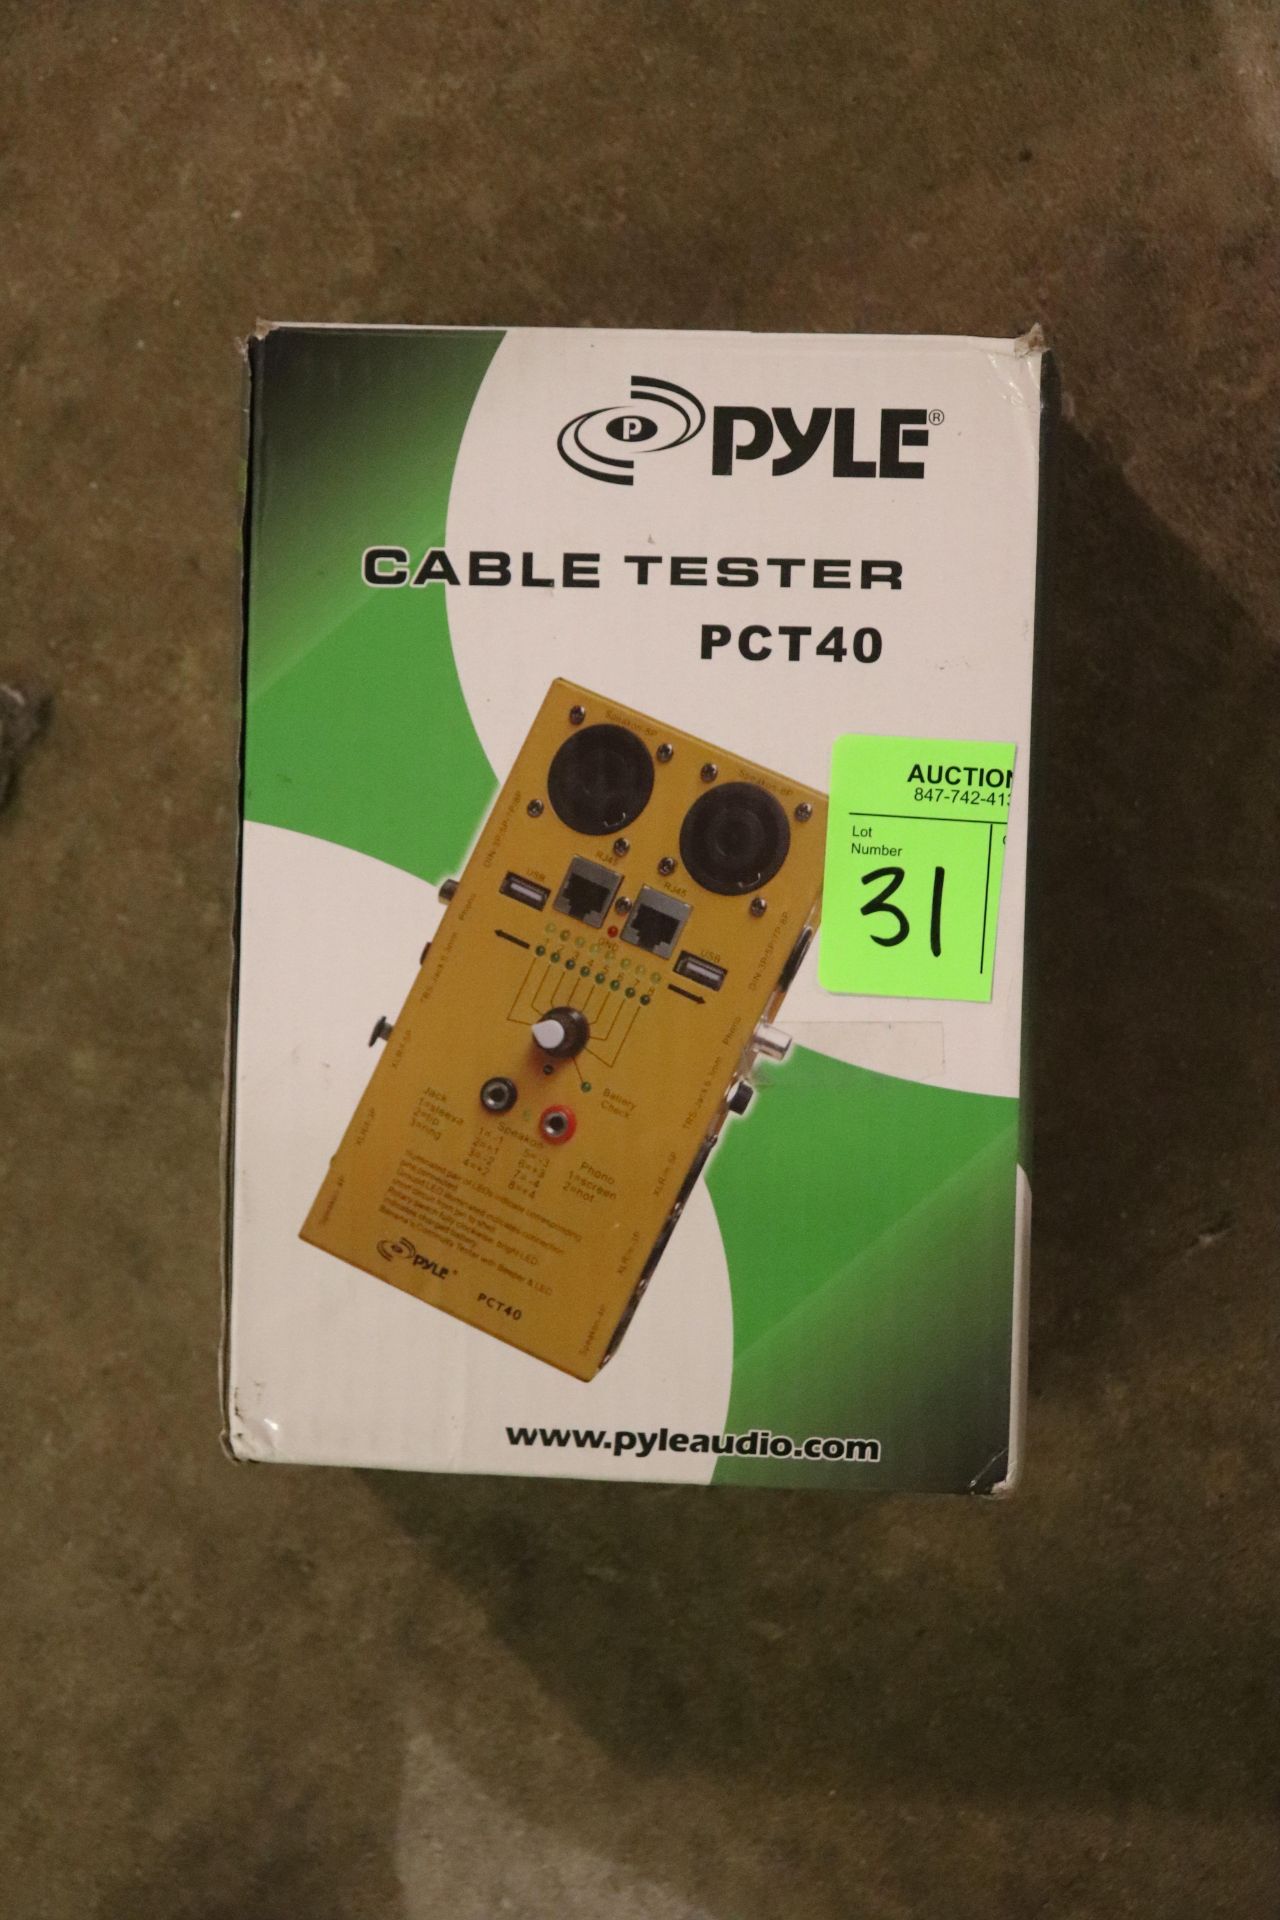 Pyle cable tester, PCT40